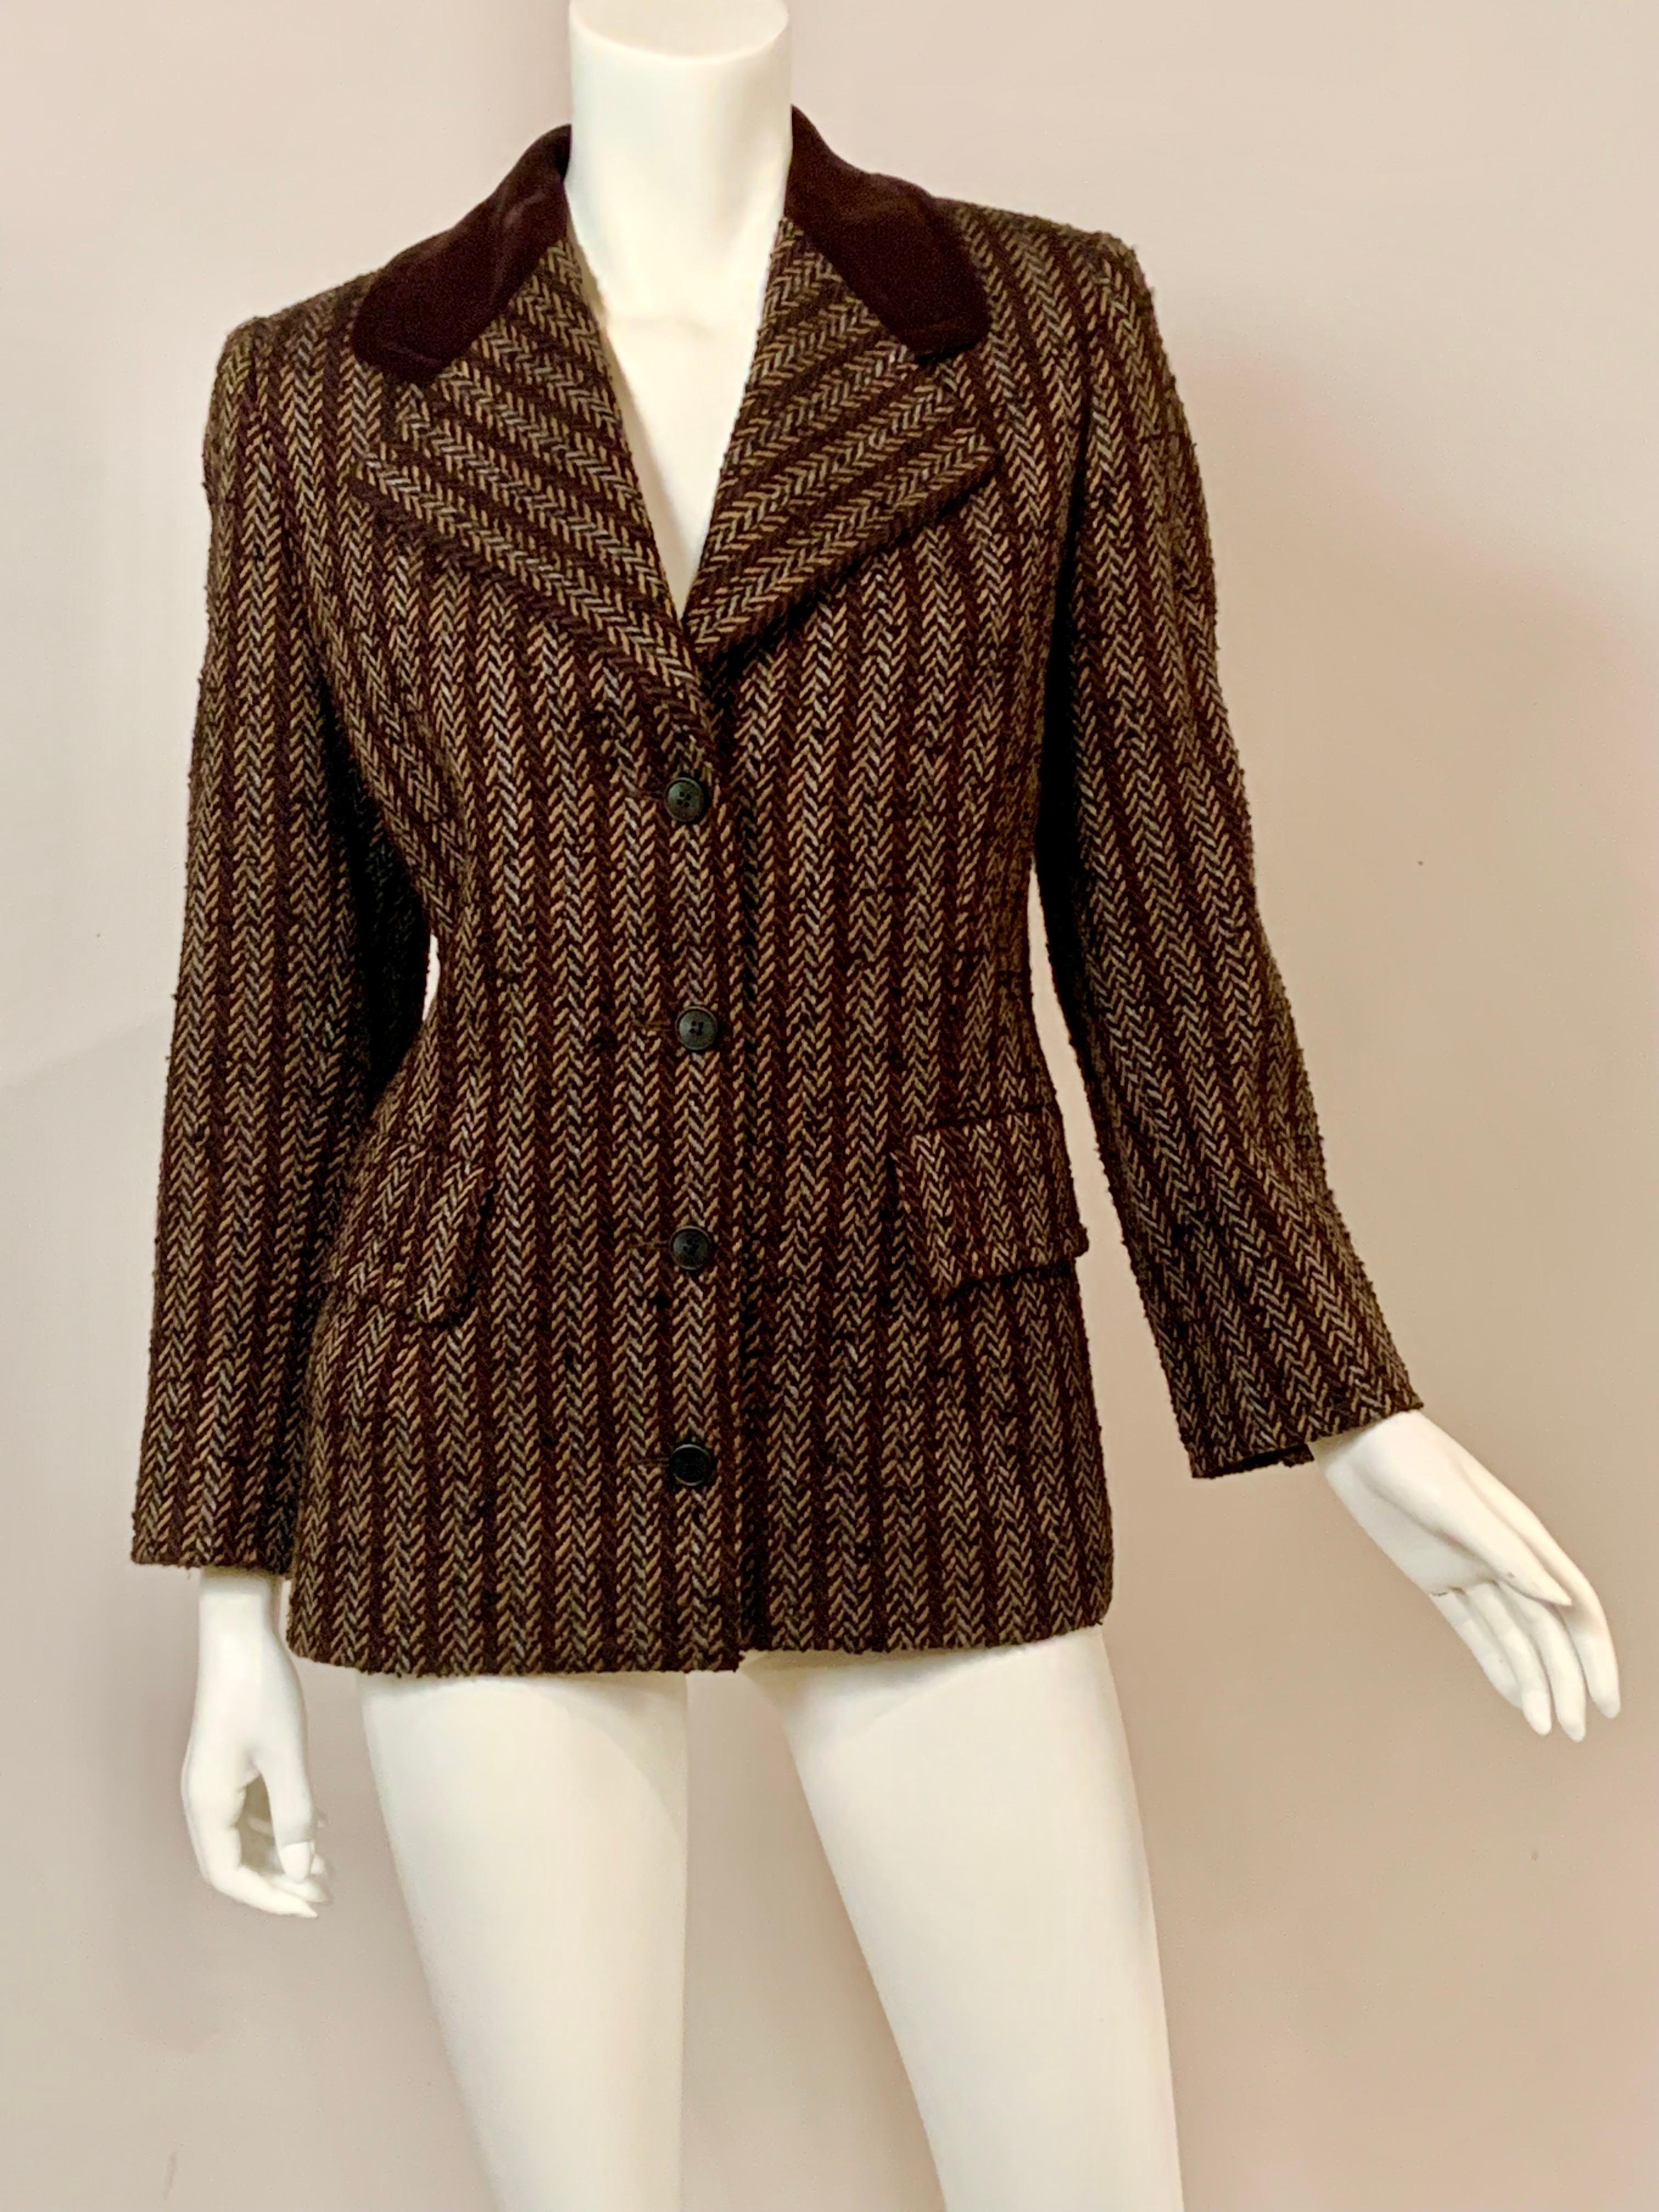 This classic Hubert de Givenchy designed wool blazer has a chocolate brown velvet collar and an unusual nubby wool herringbone fabric that was woven with four colors instead of the usual two colors.  The fabric is chocolate brown, copper, black and